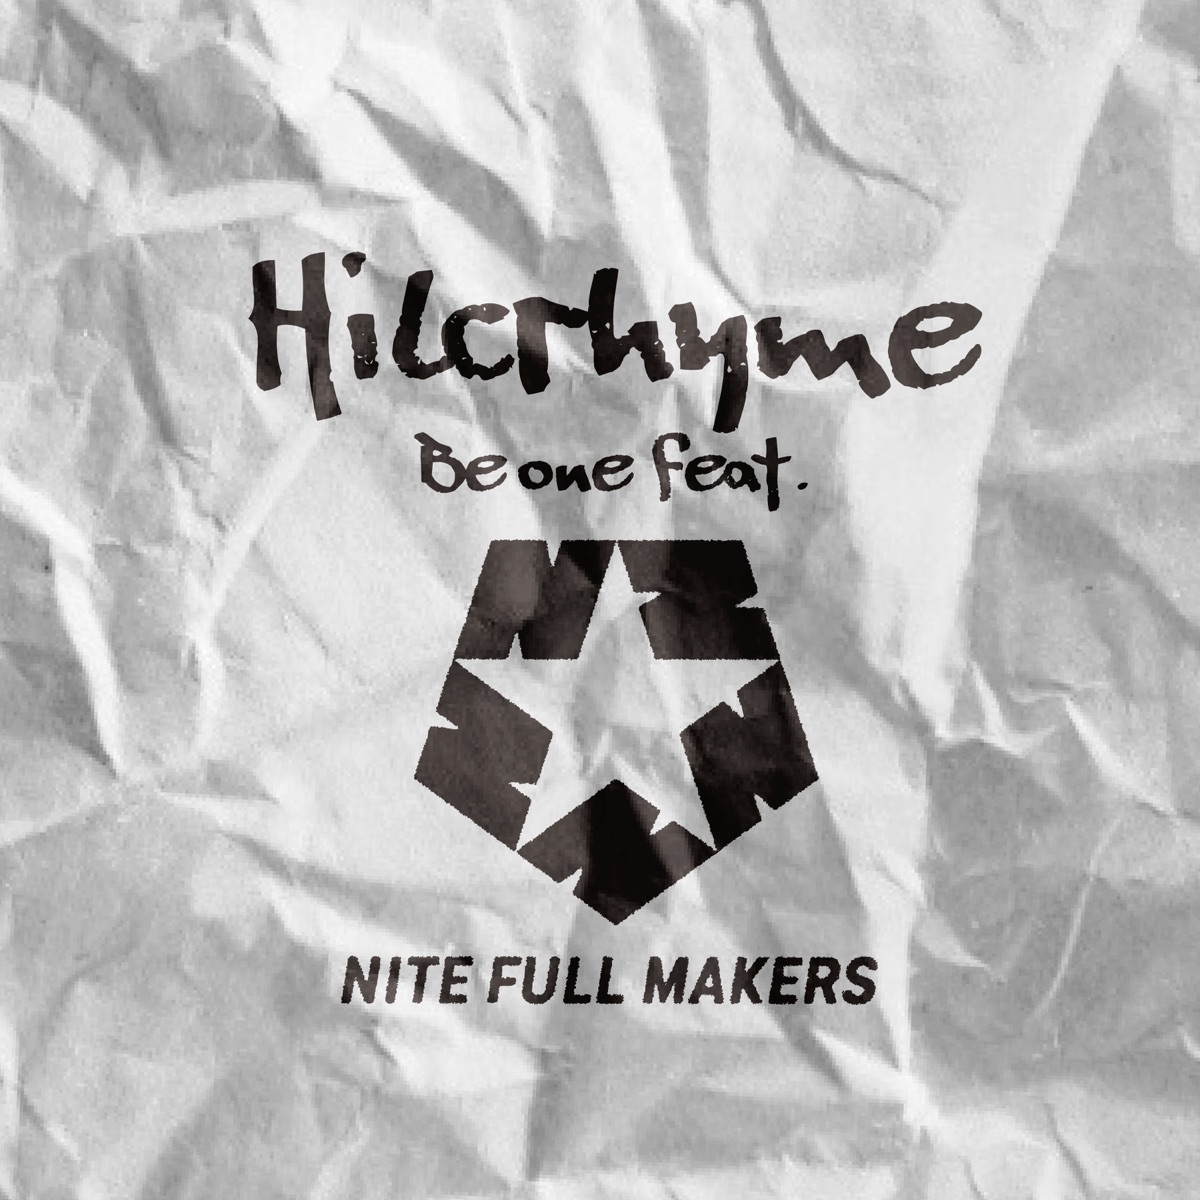 Cover art for『Hilcrhyme - Be one (feat. NITE FULL MAKERS)』from the release『Be one (feat. NITE FULL MAKERS)